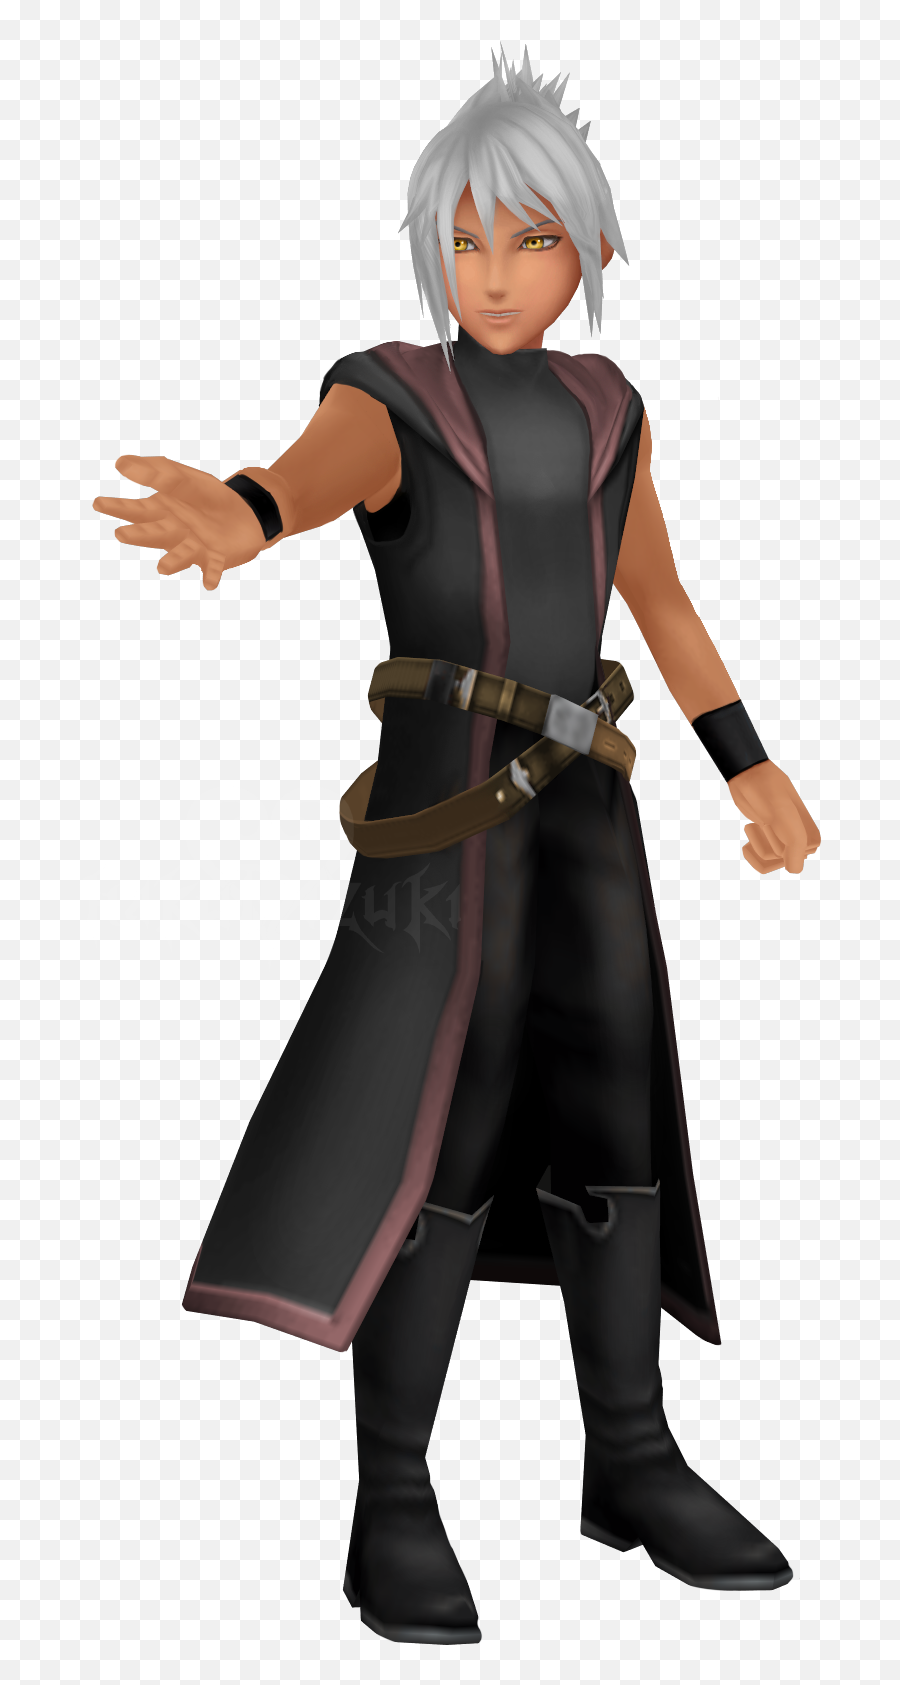 Cynical On Twitter Yo Awesome Young Xehanort Model - Young Xehanort Model Emoji,Deviantart Emoticons Icon